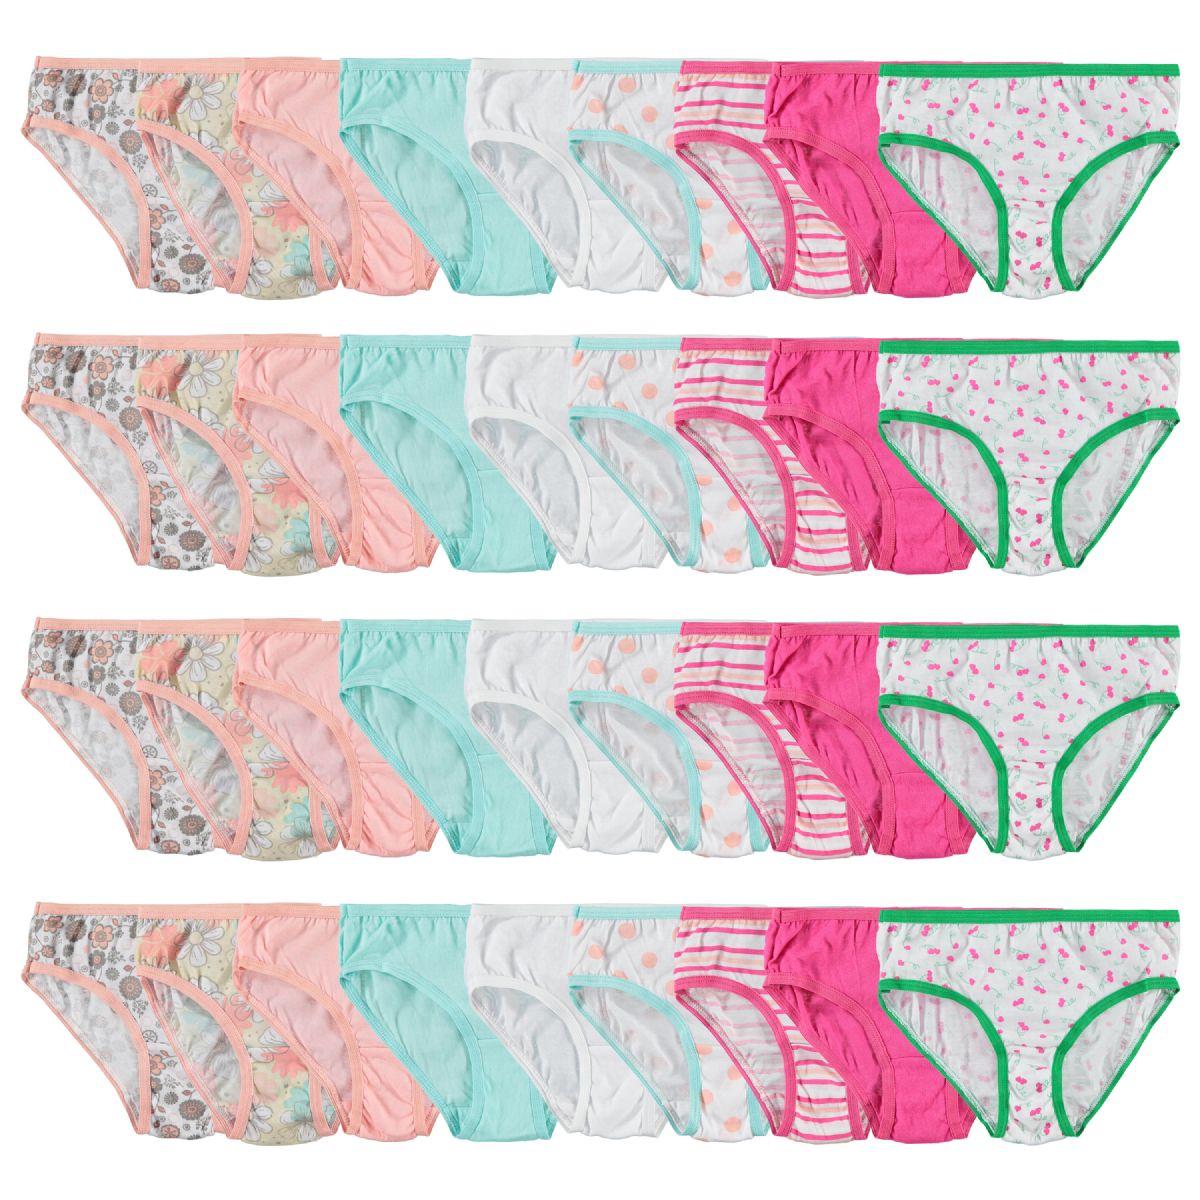 72 Wholesale Girls Cotton Blend Assorted Printed Underwear Size 12 - at 